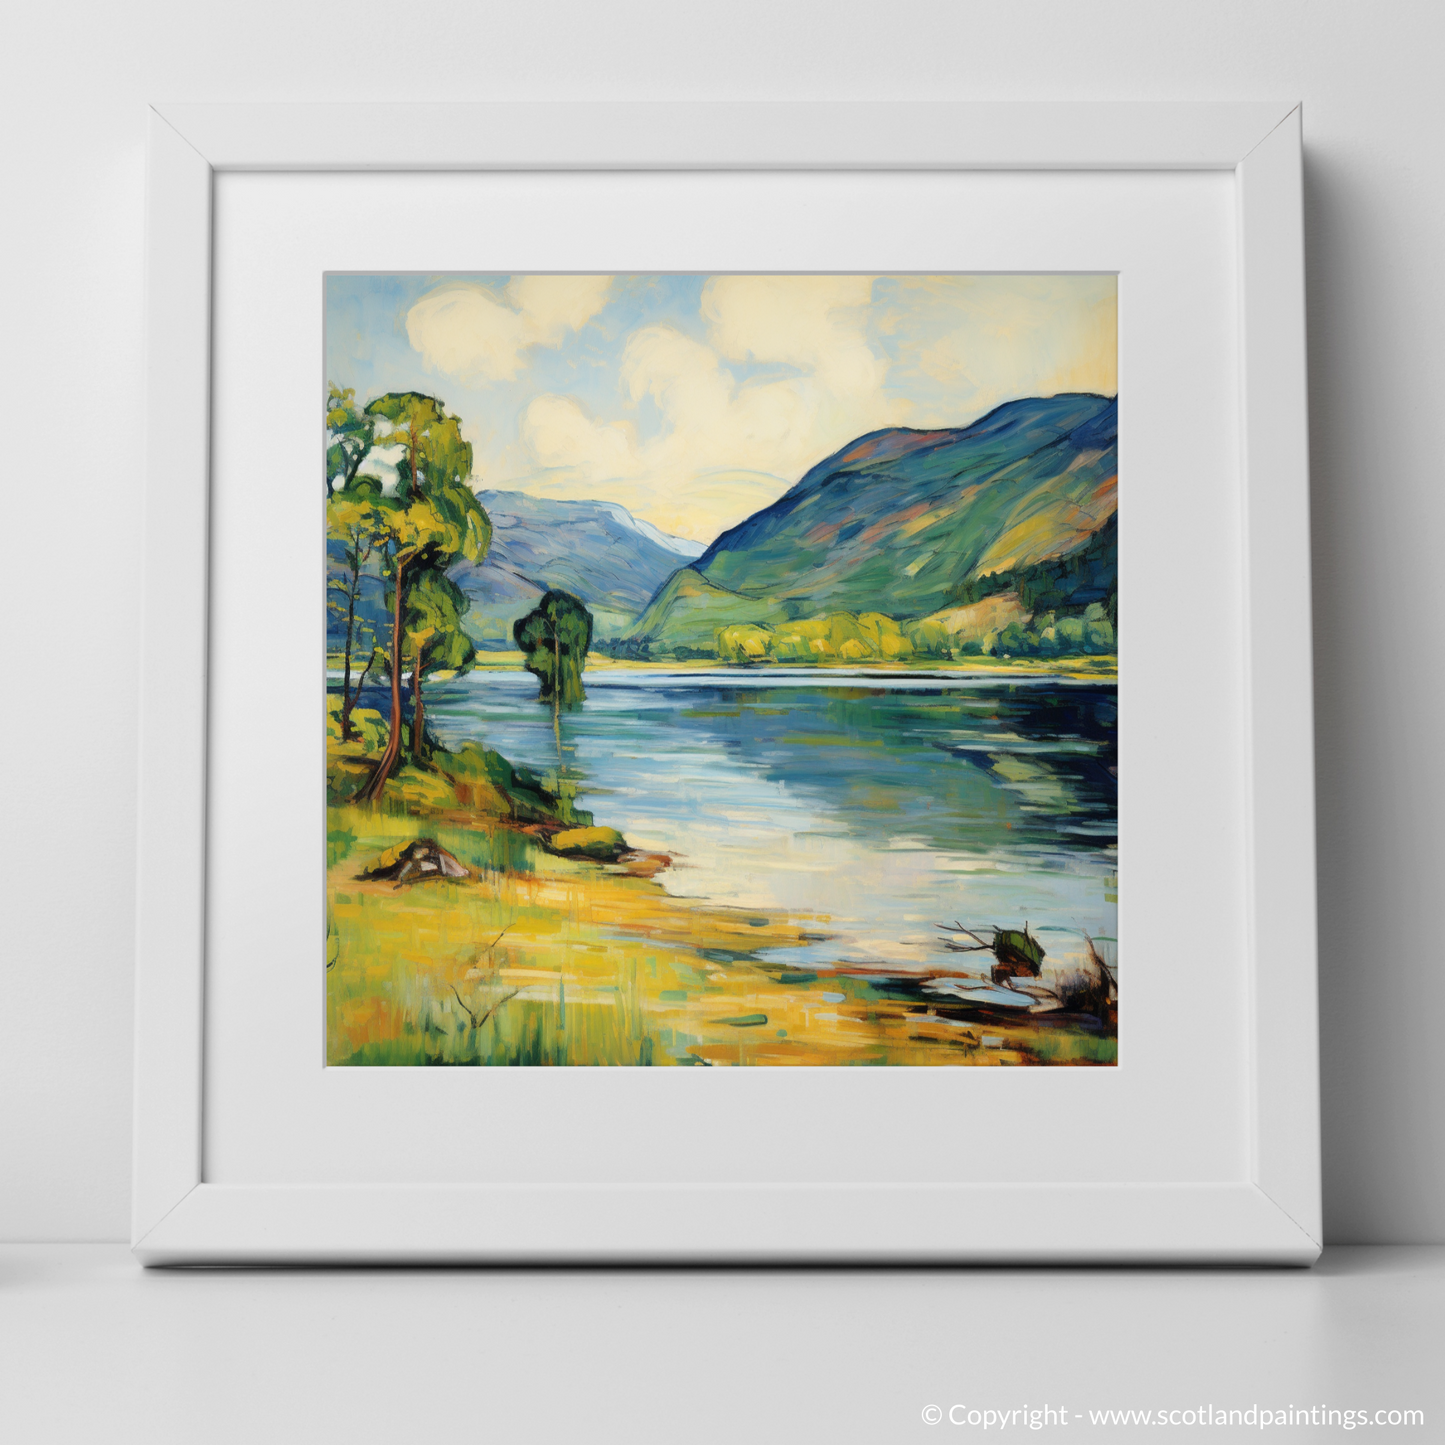 Art Print of Loch Voil in summer with a white frame